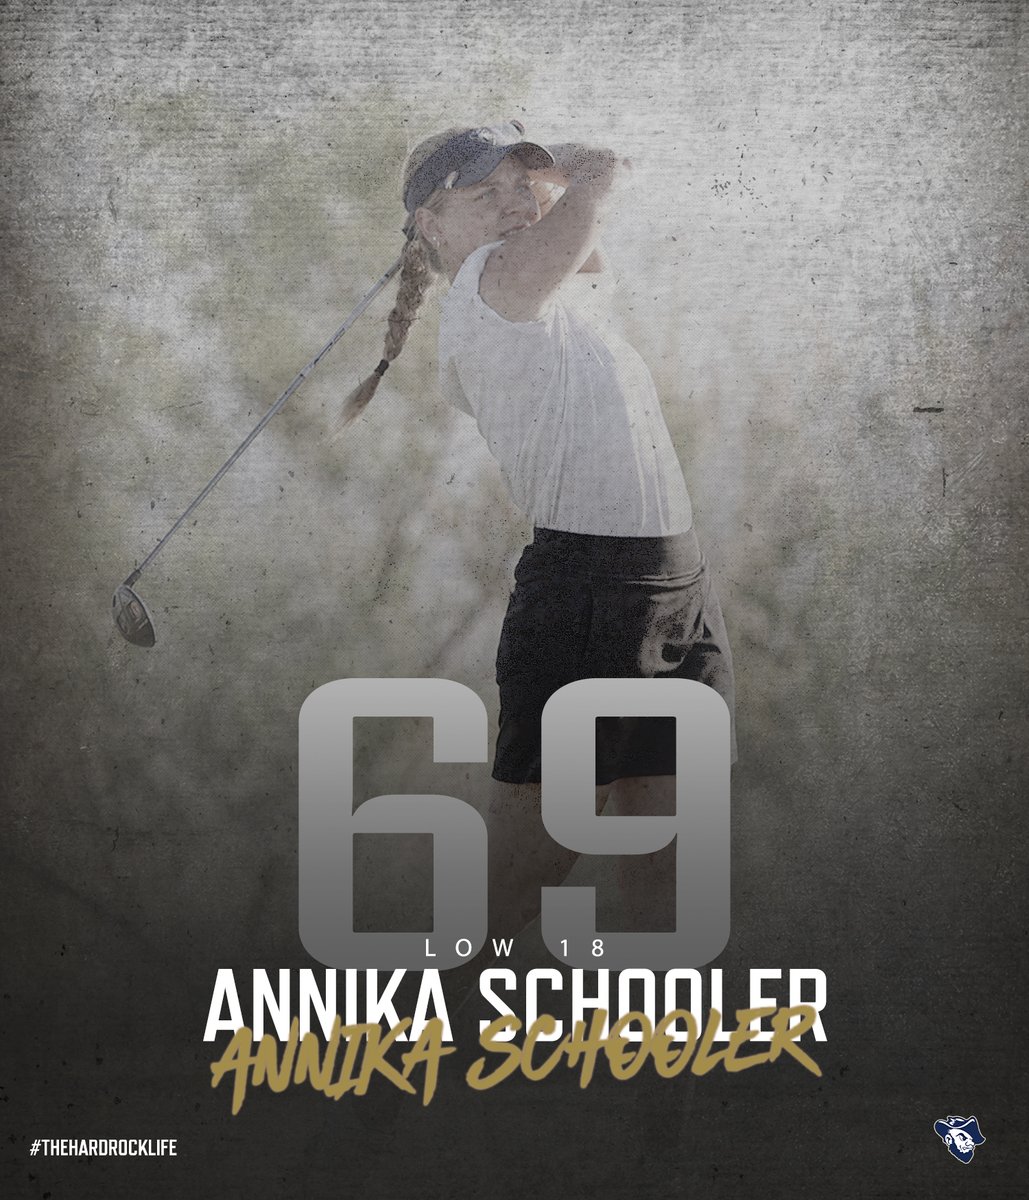 Annika Schooler was firing on all cylinders today in round 1 as she set a new school record with a -3, 69! She currently sits atop the individual leaderboard with a few golfers finishing up. 

#TheHardrockLife